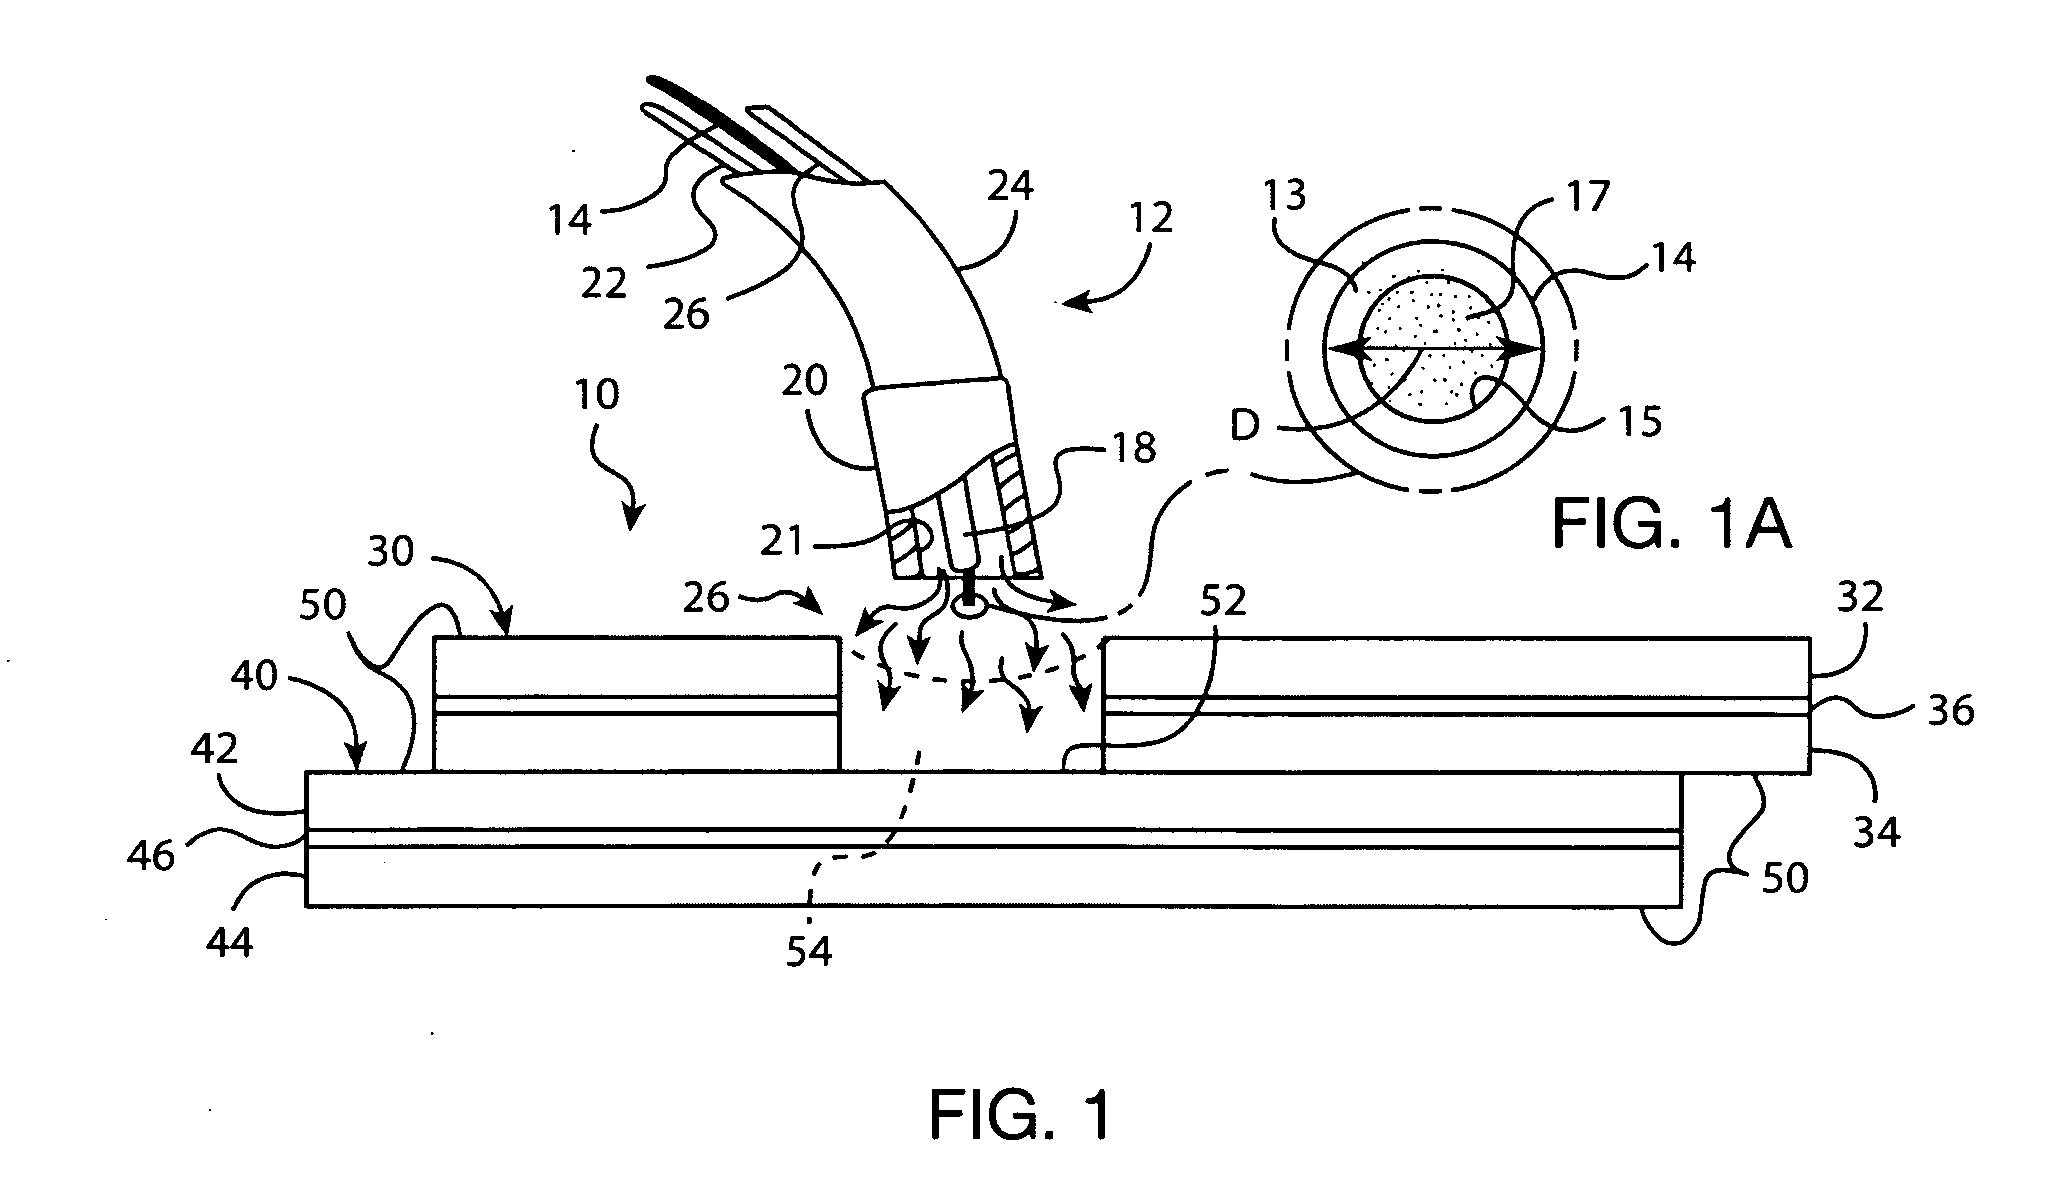 Welded metal laminate structure and method for welding a metal laminate structure